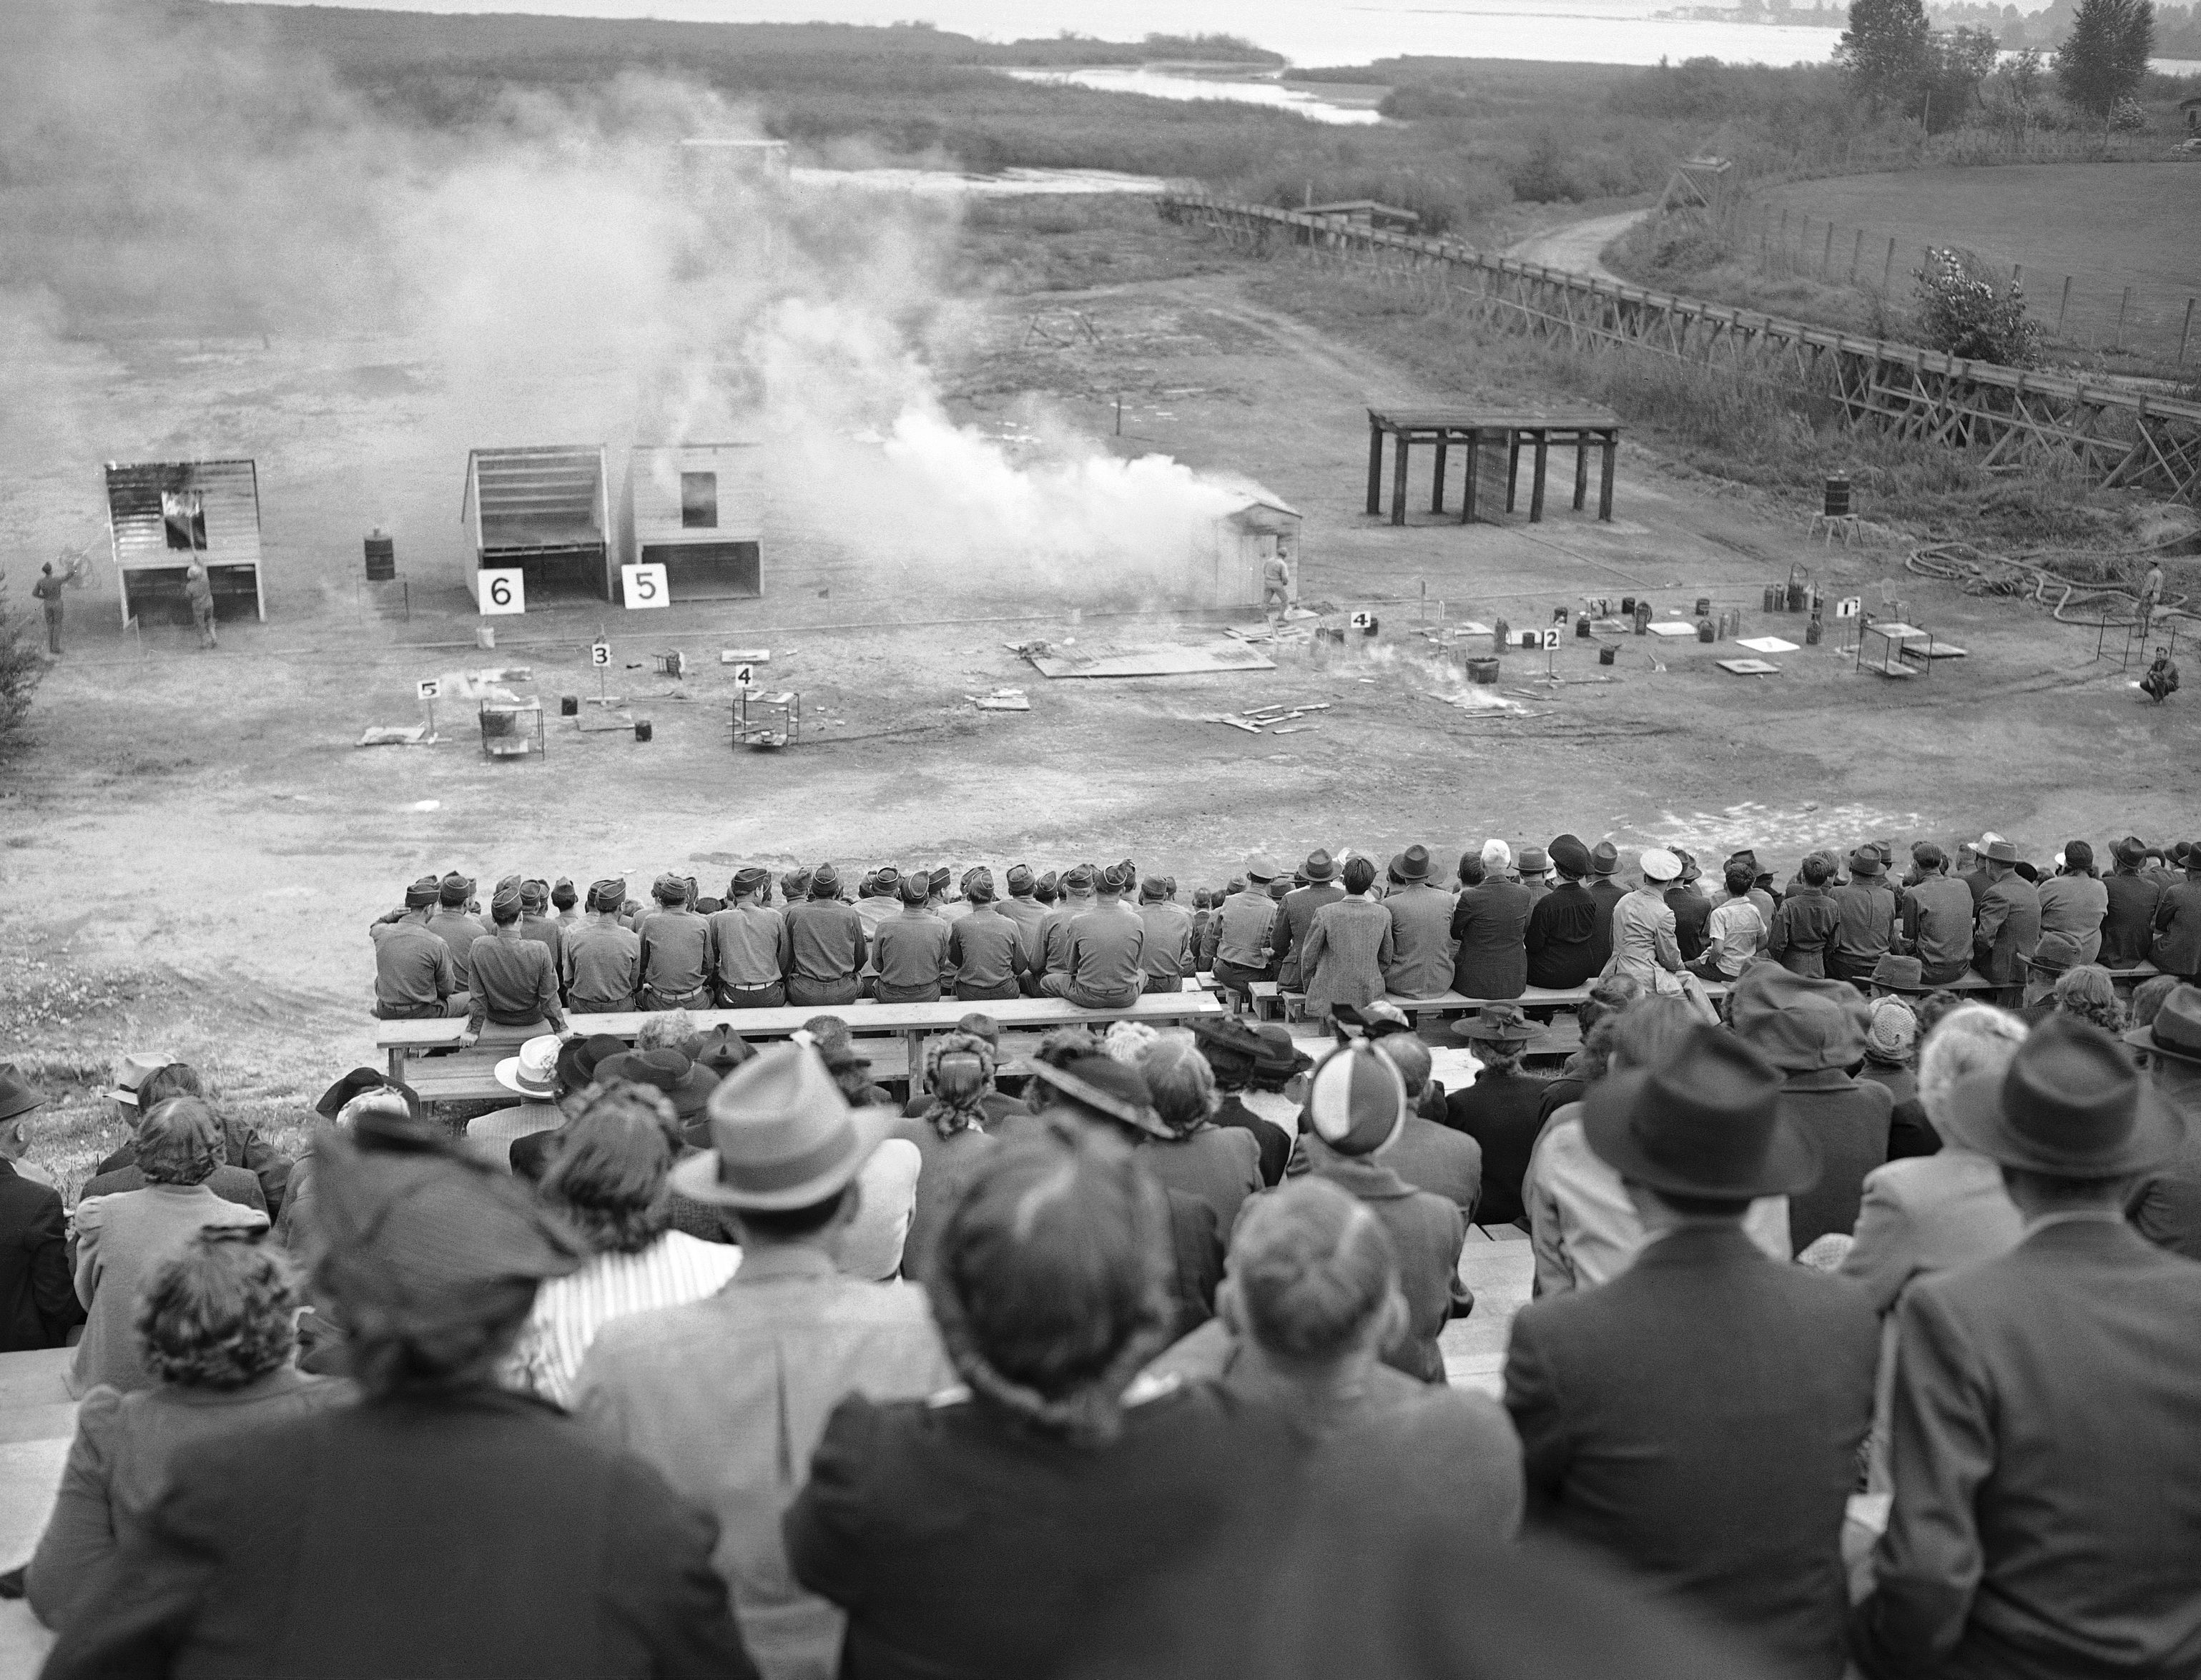 Live bombs of both fire and demolition types exploded by remote control, are going off in a special Amphitheater in a spectacular demonstration which is part of the ten-day course at the War Department Civilian Protection School at the University of Washington, in Seattle, Sept. 26, 1942. Students in the foreground watching. The school sponsored by the U.S. Office of Civilian Defense, the U.S. Army and Washington State Defense Council.  (AP Photo)